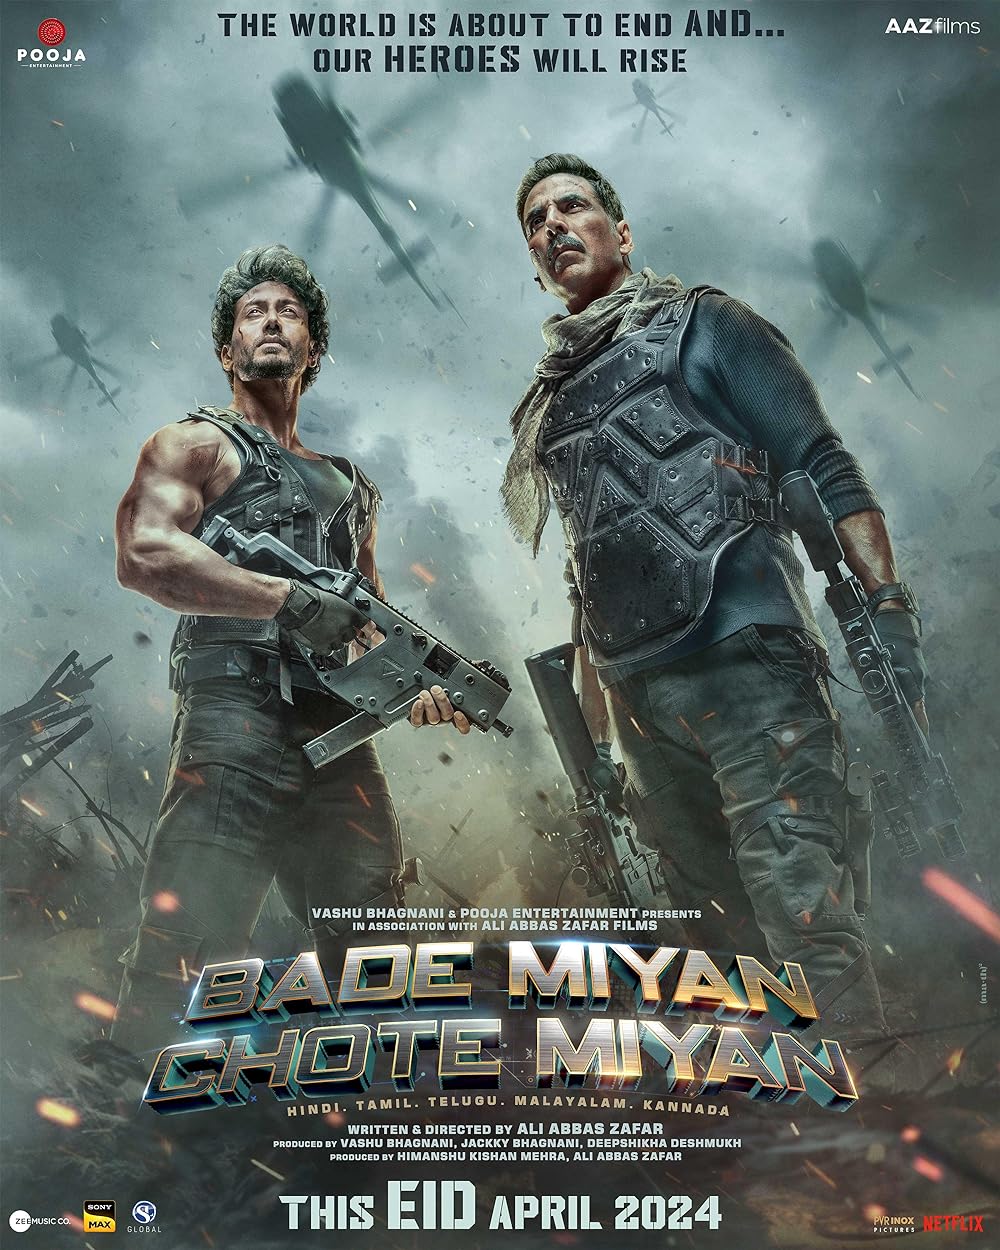 Bade Miyan Chote Miyan (Hindi) - April 10With their different personalities and unique approaches, Bade Miyan and Chote Miyan must set aside their differences and work together to bring the culprits to justice and save the day.